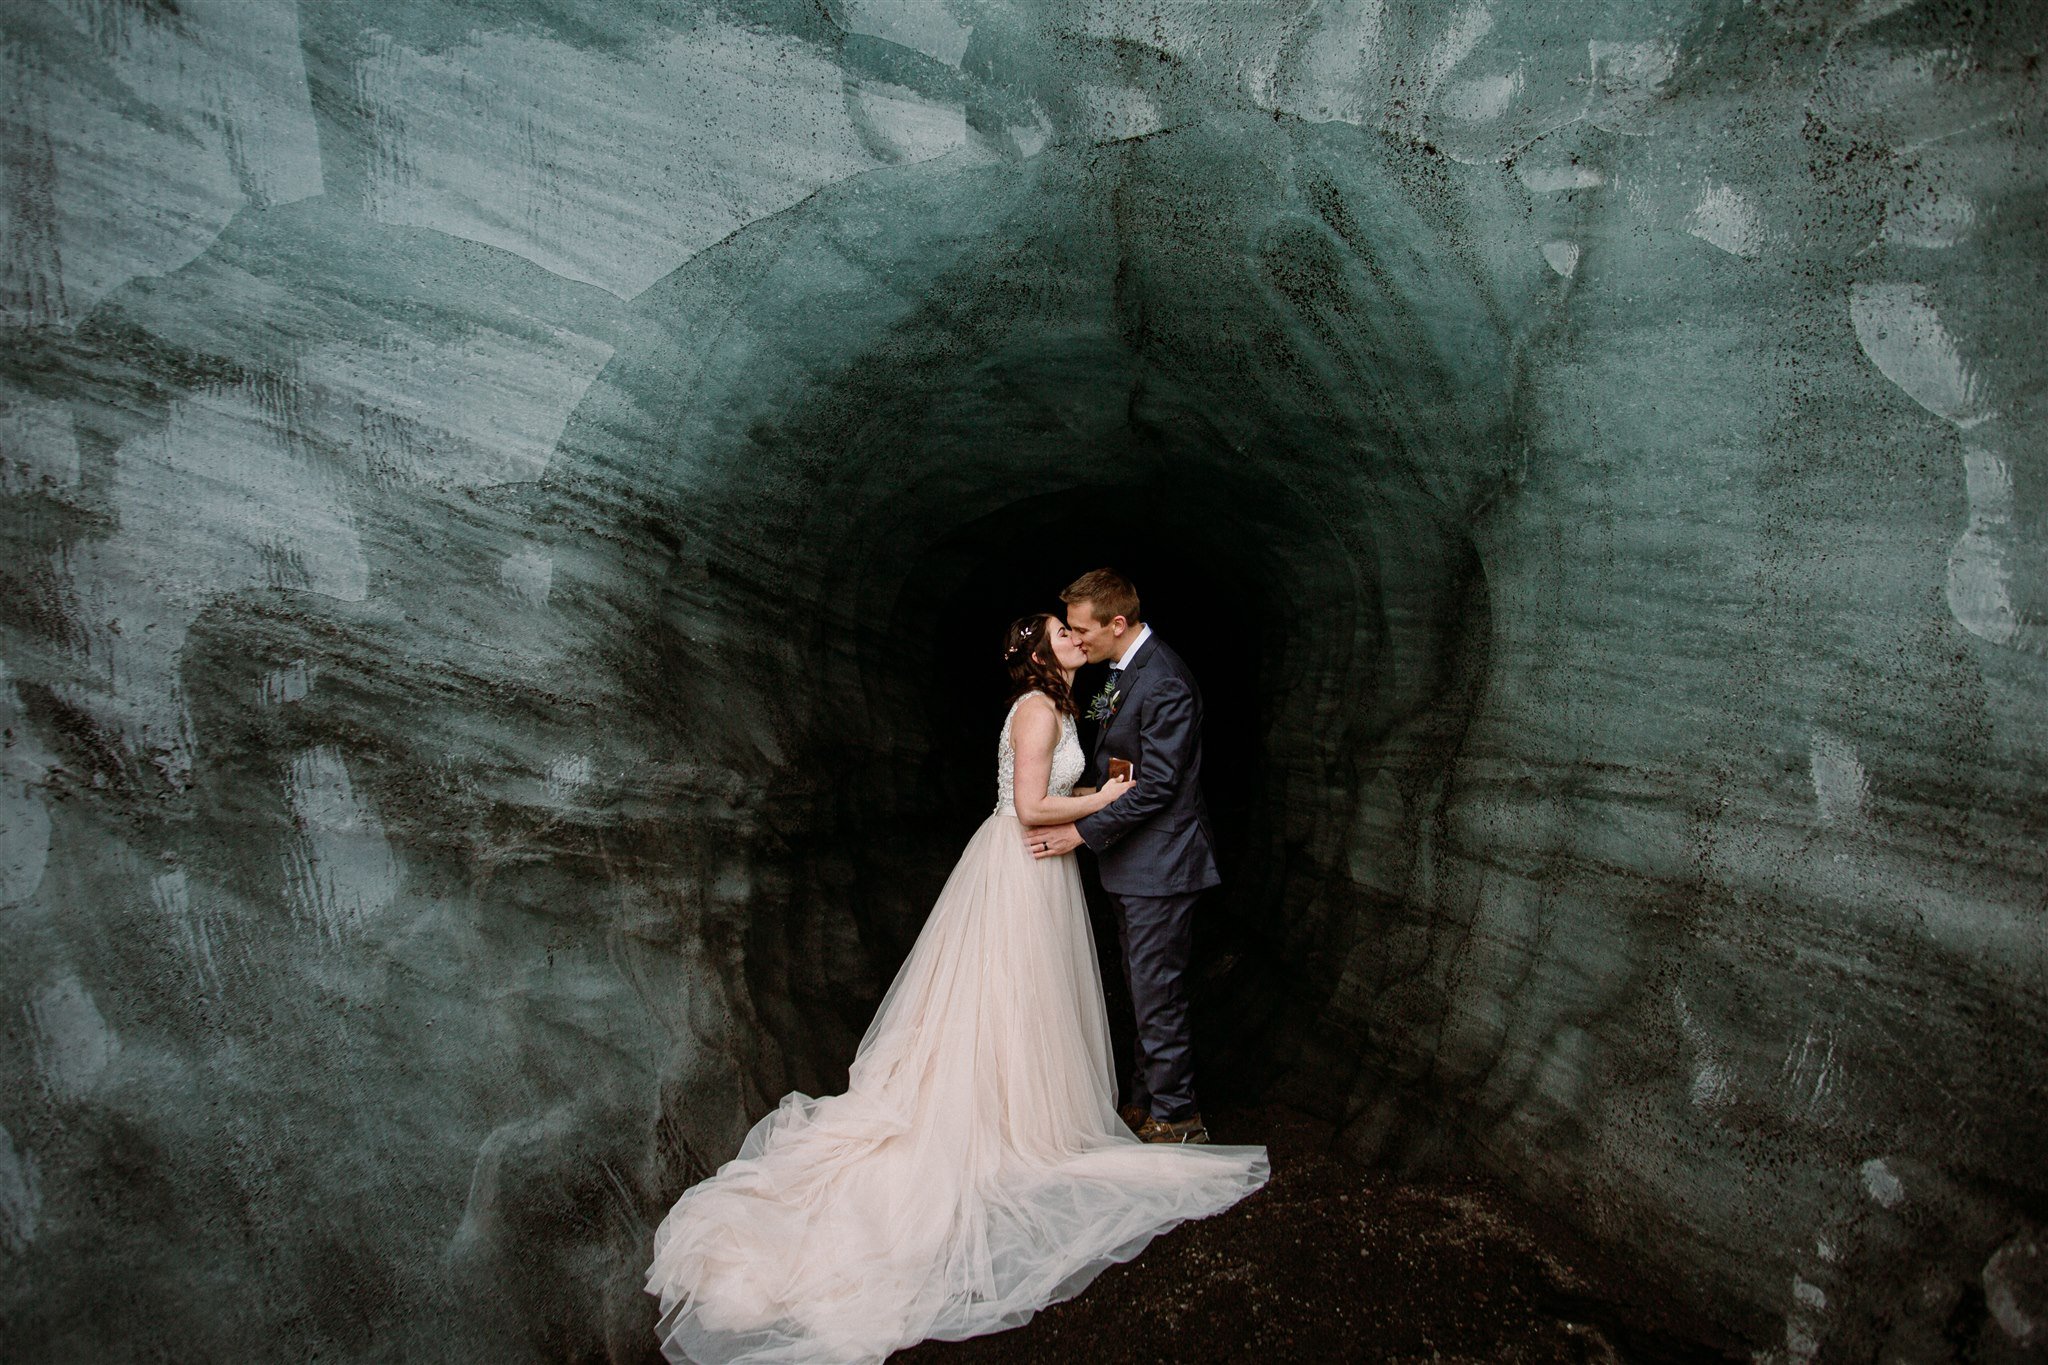 Iceland Elopement at a glacier in South Iceland by Iceland elopement photographer &amp; planner